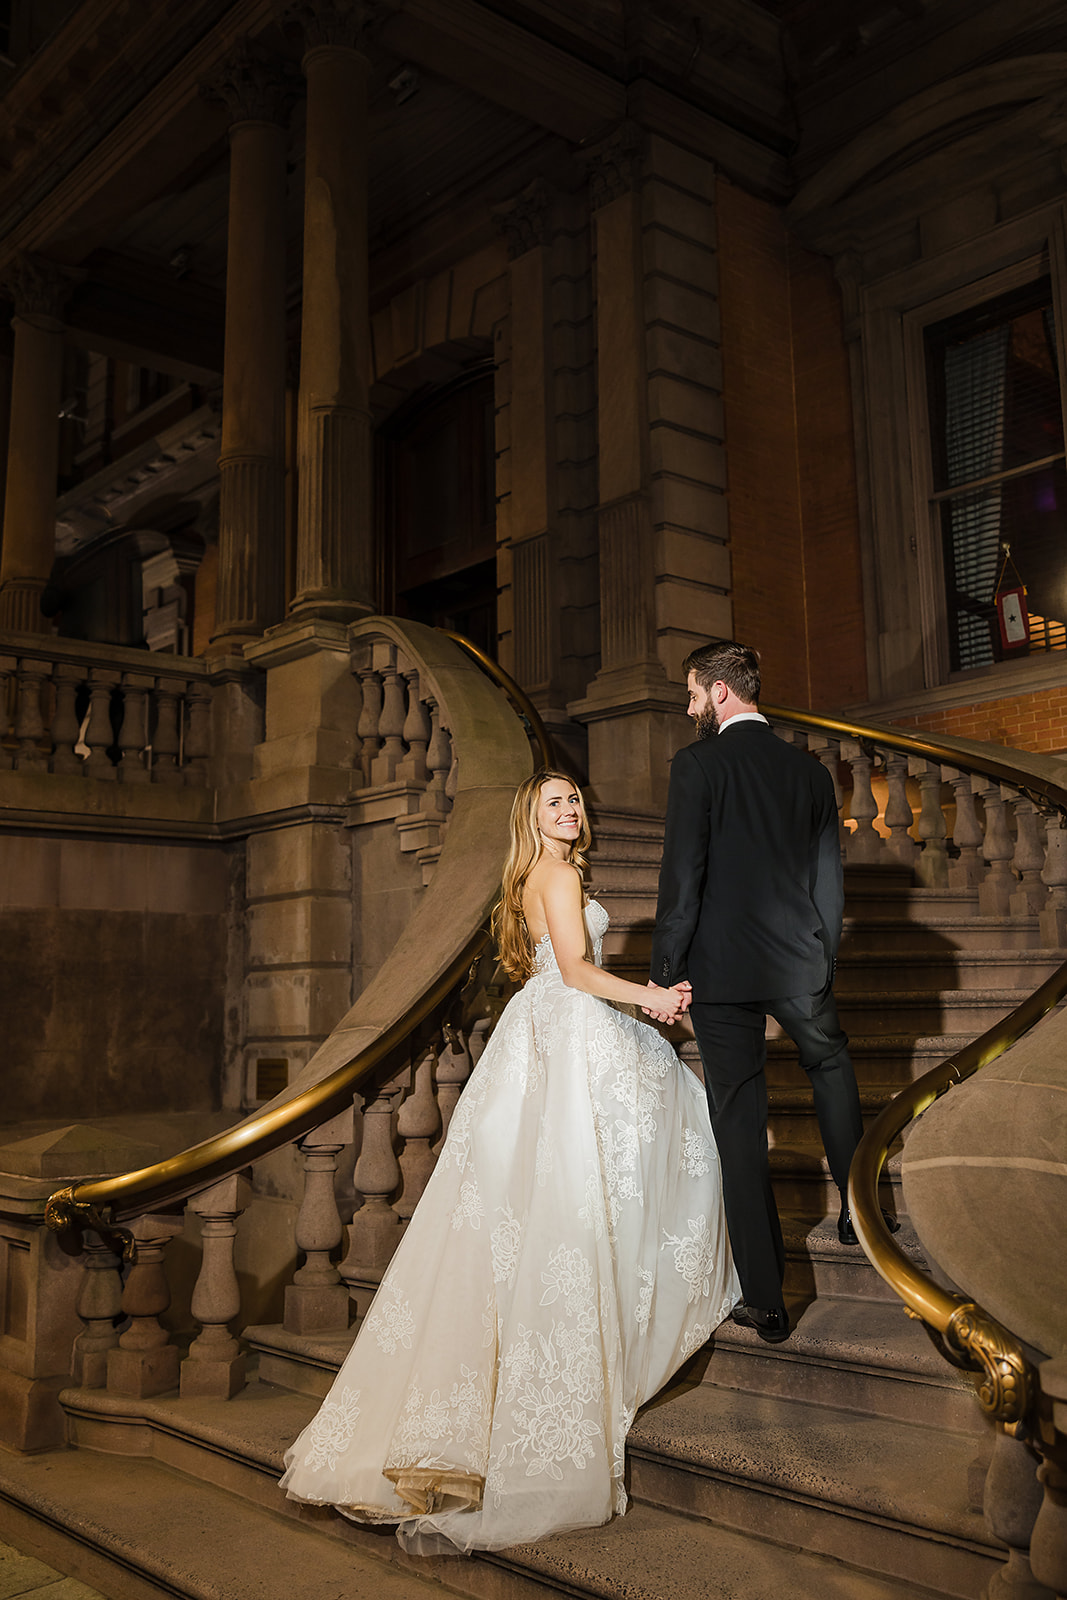 Nighttime wedding photo of the bride and groom  in Philadelphia on the steps of the Union League